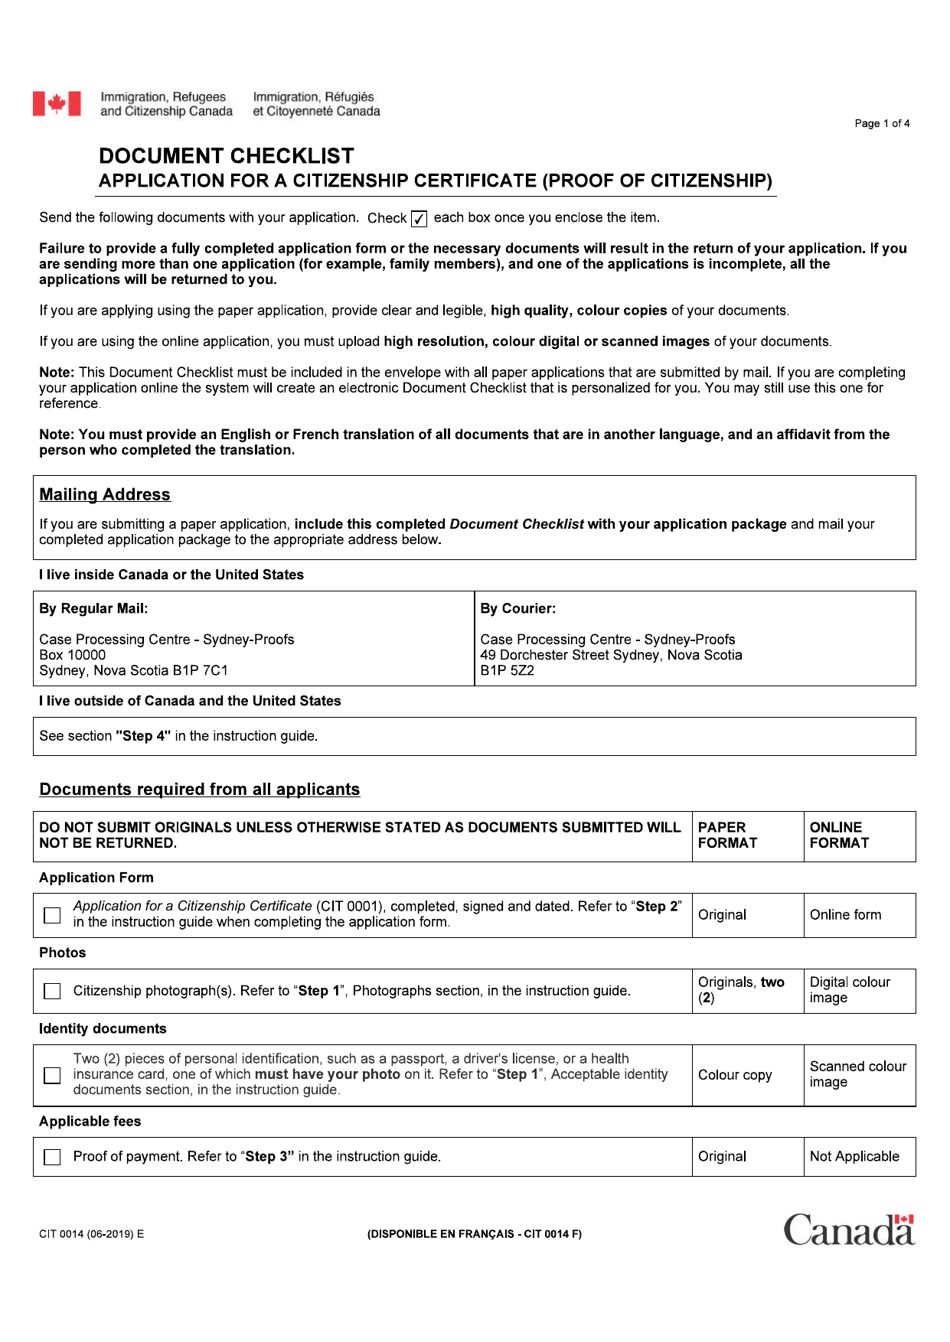 Form CIT0014 Document Checklist - Application for a Citizenship Certificate (Proof of Citizenship) - Canada, Page 1